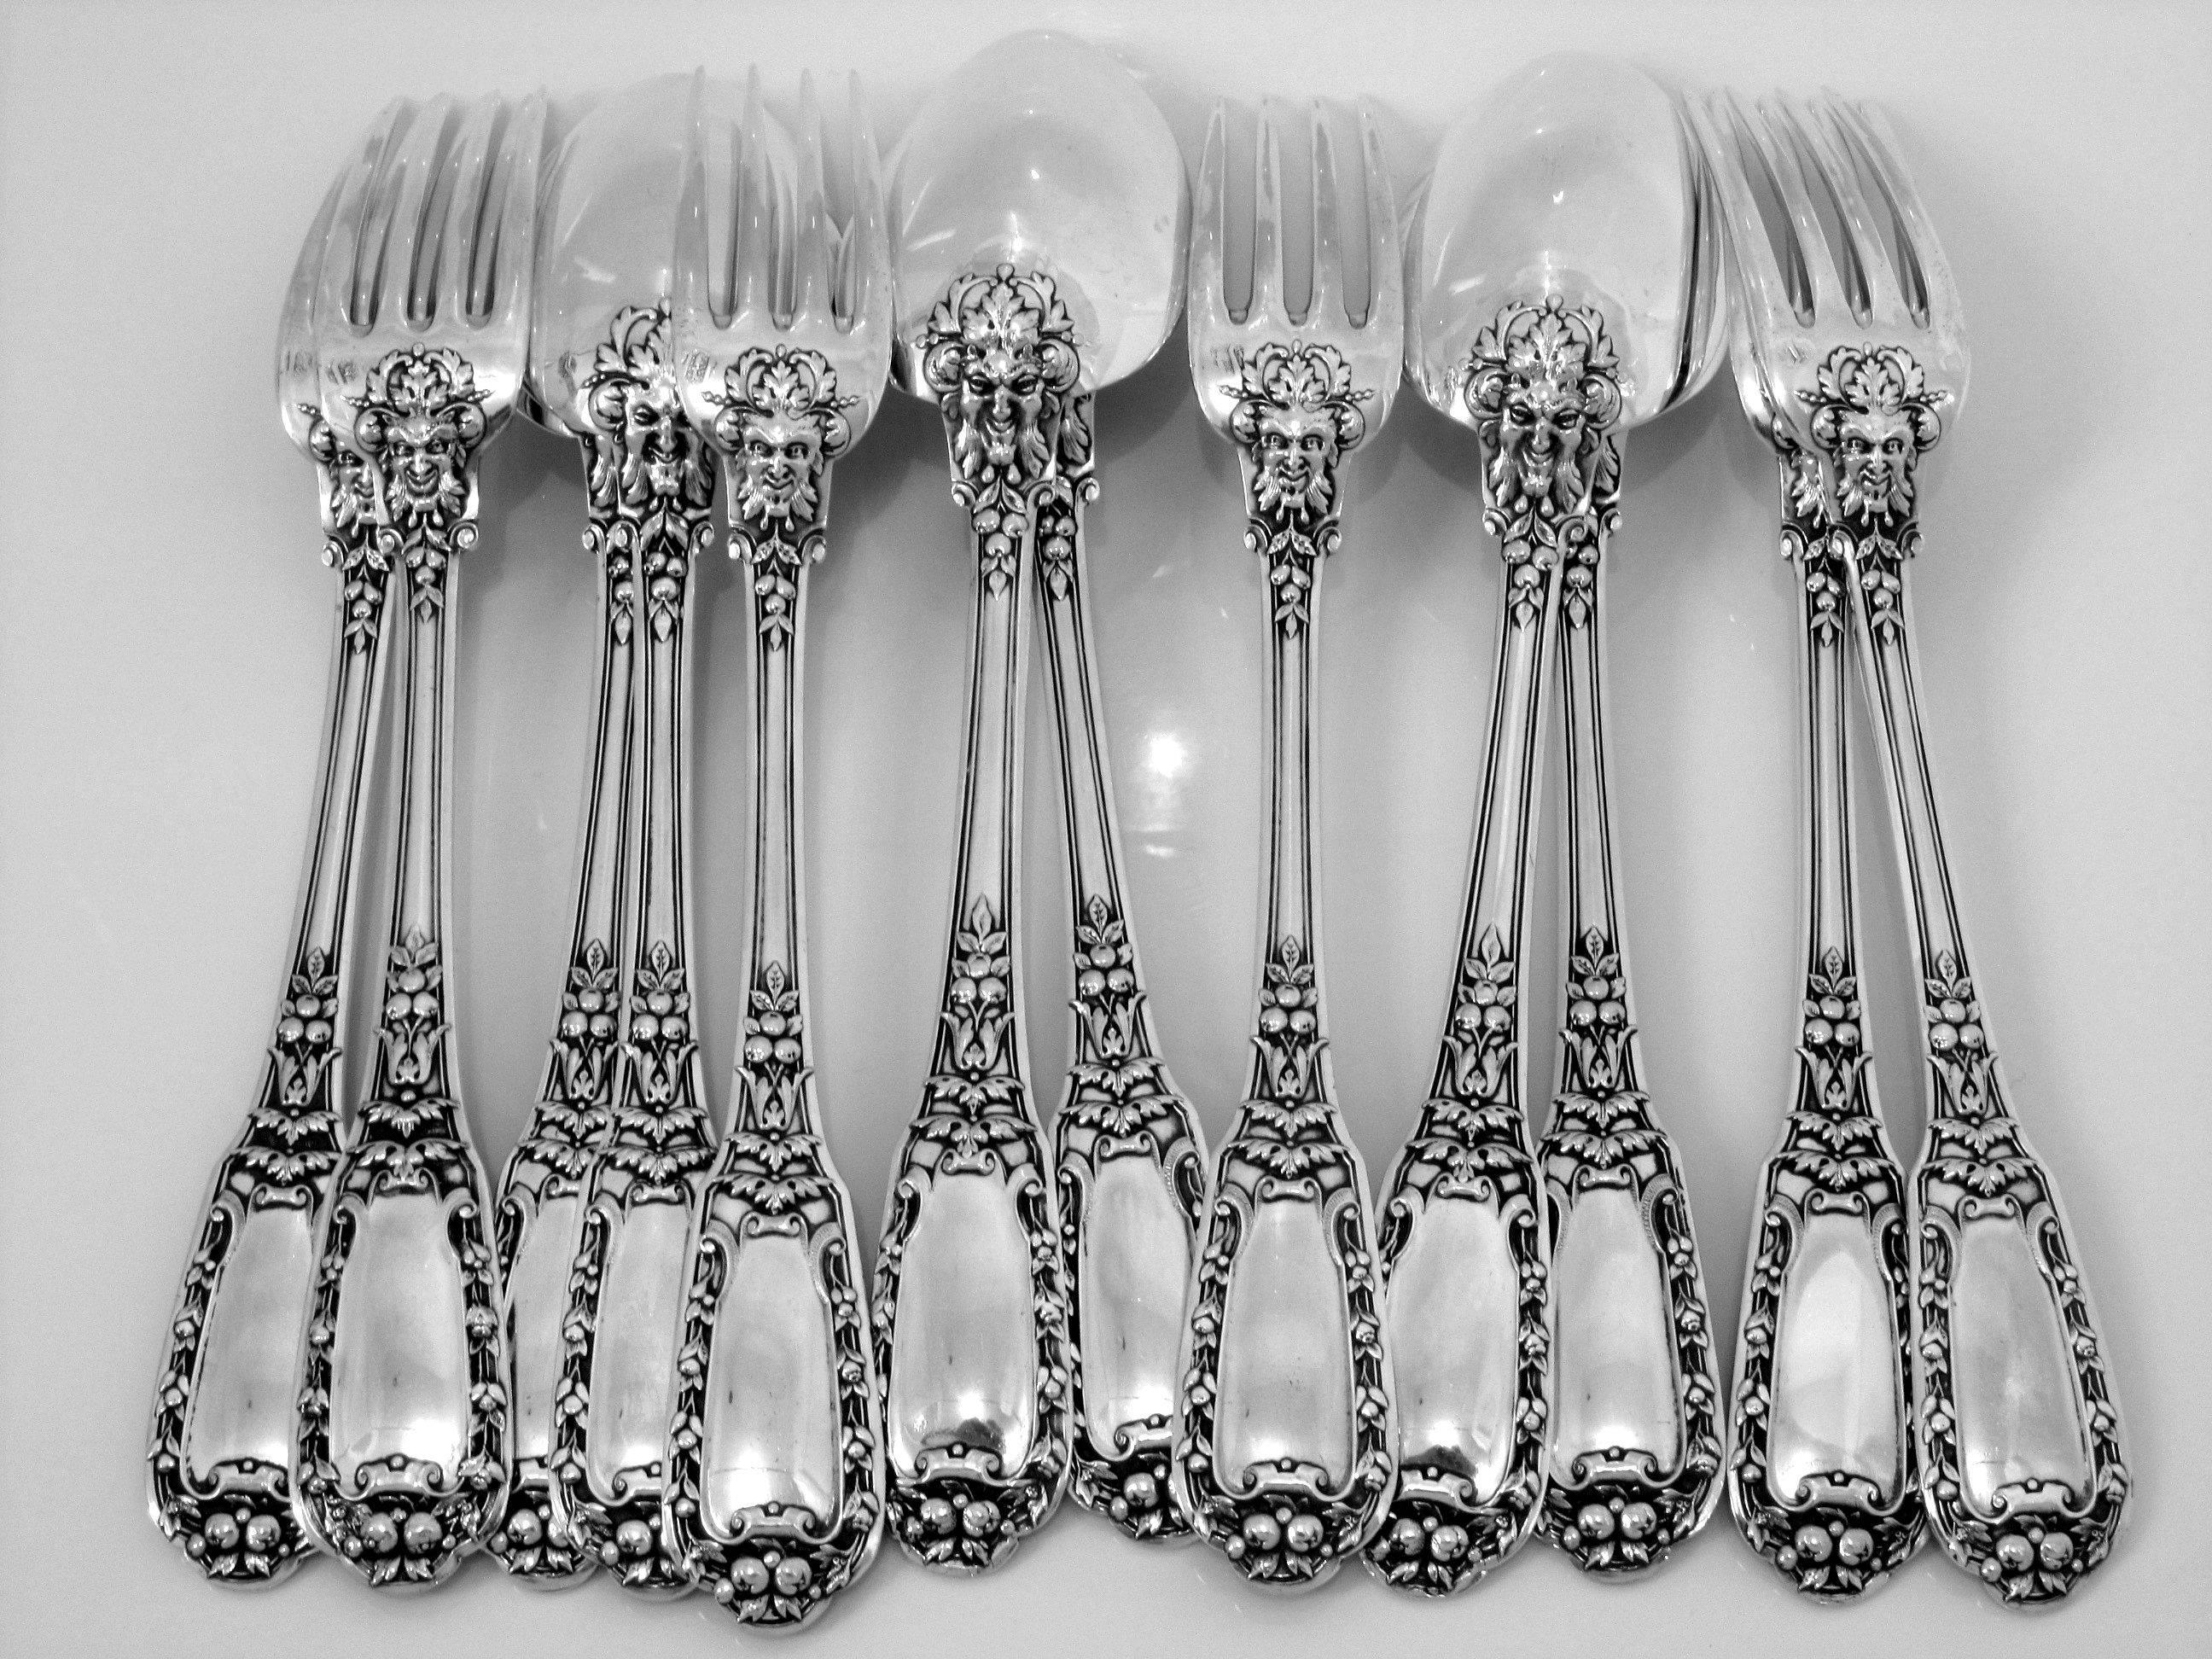 Soufflot Gorgeous French Sterling Silver Dinner Flatware Set 12 pc Mascarons For Sale 4